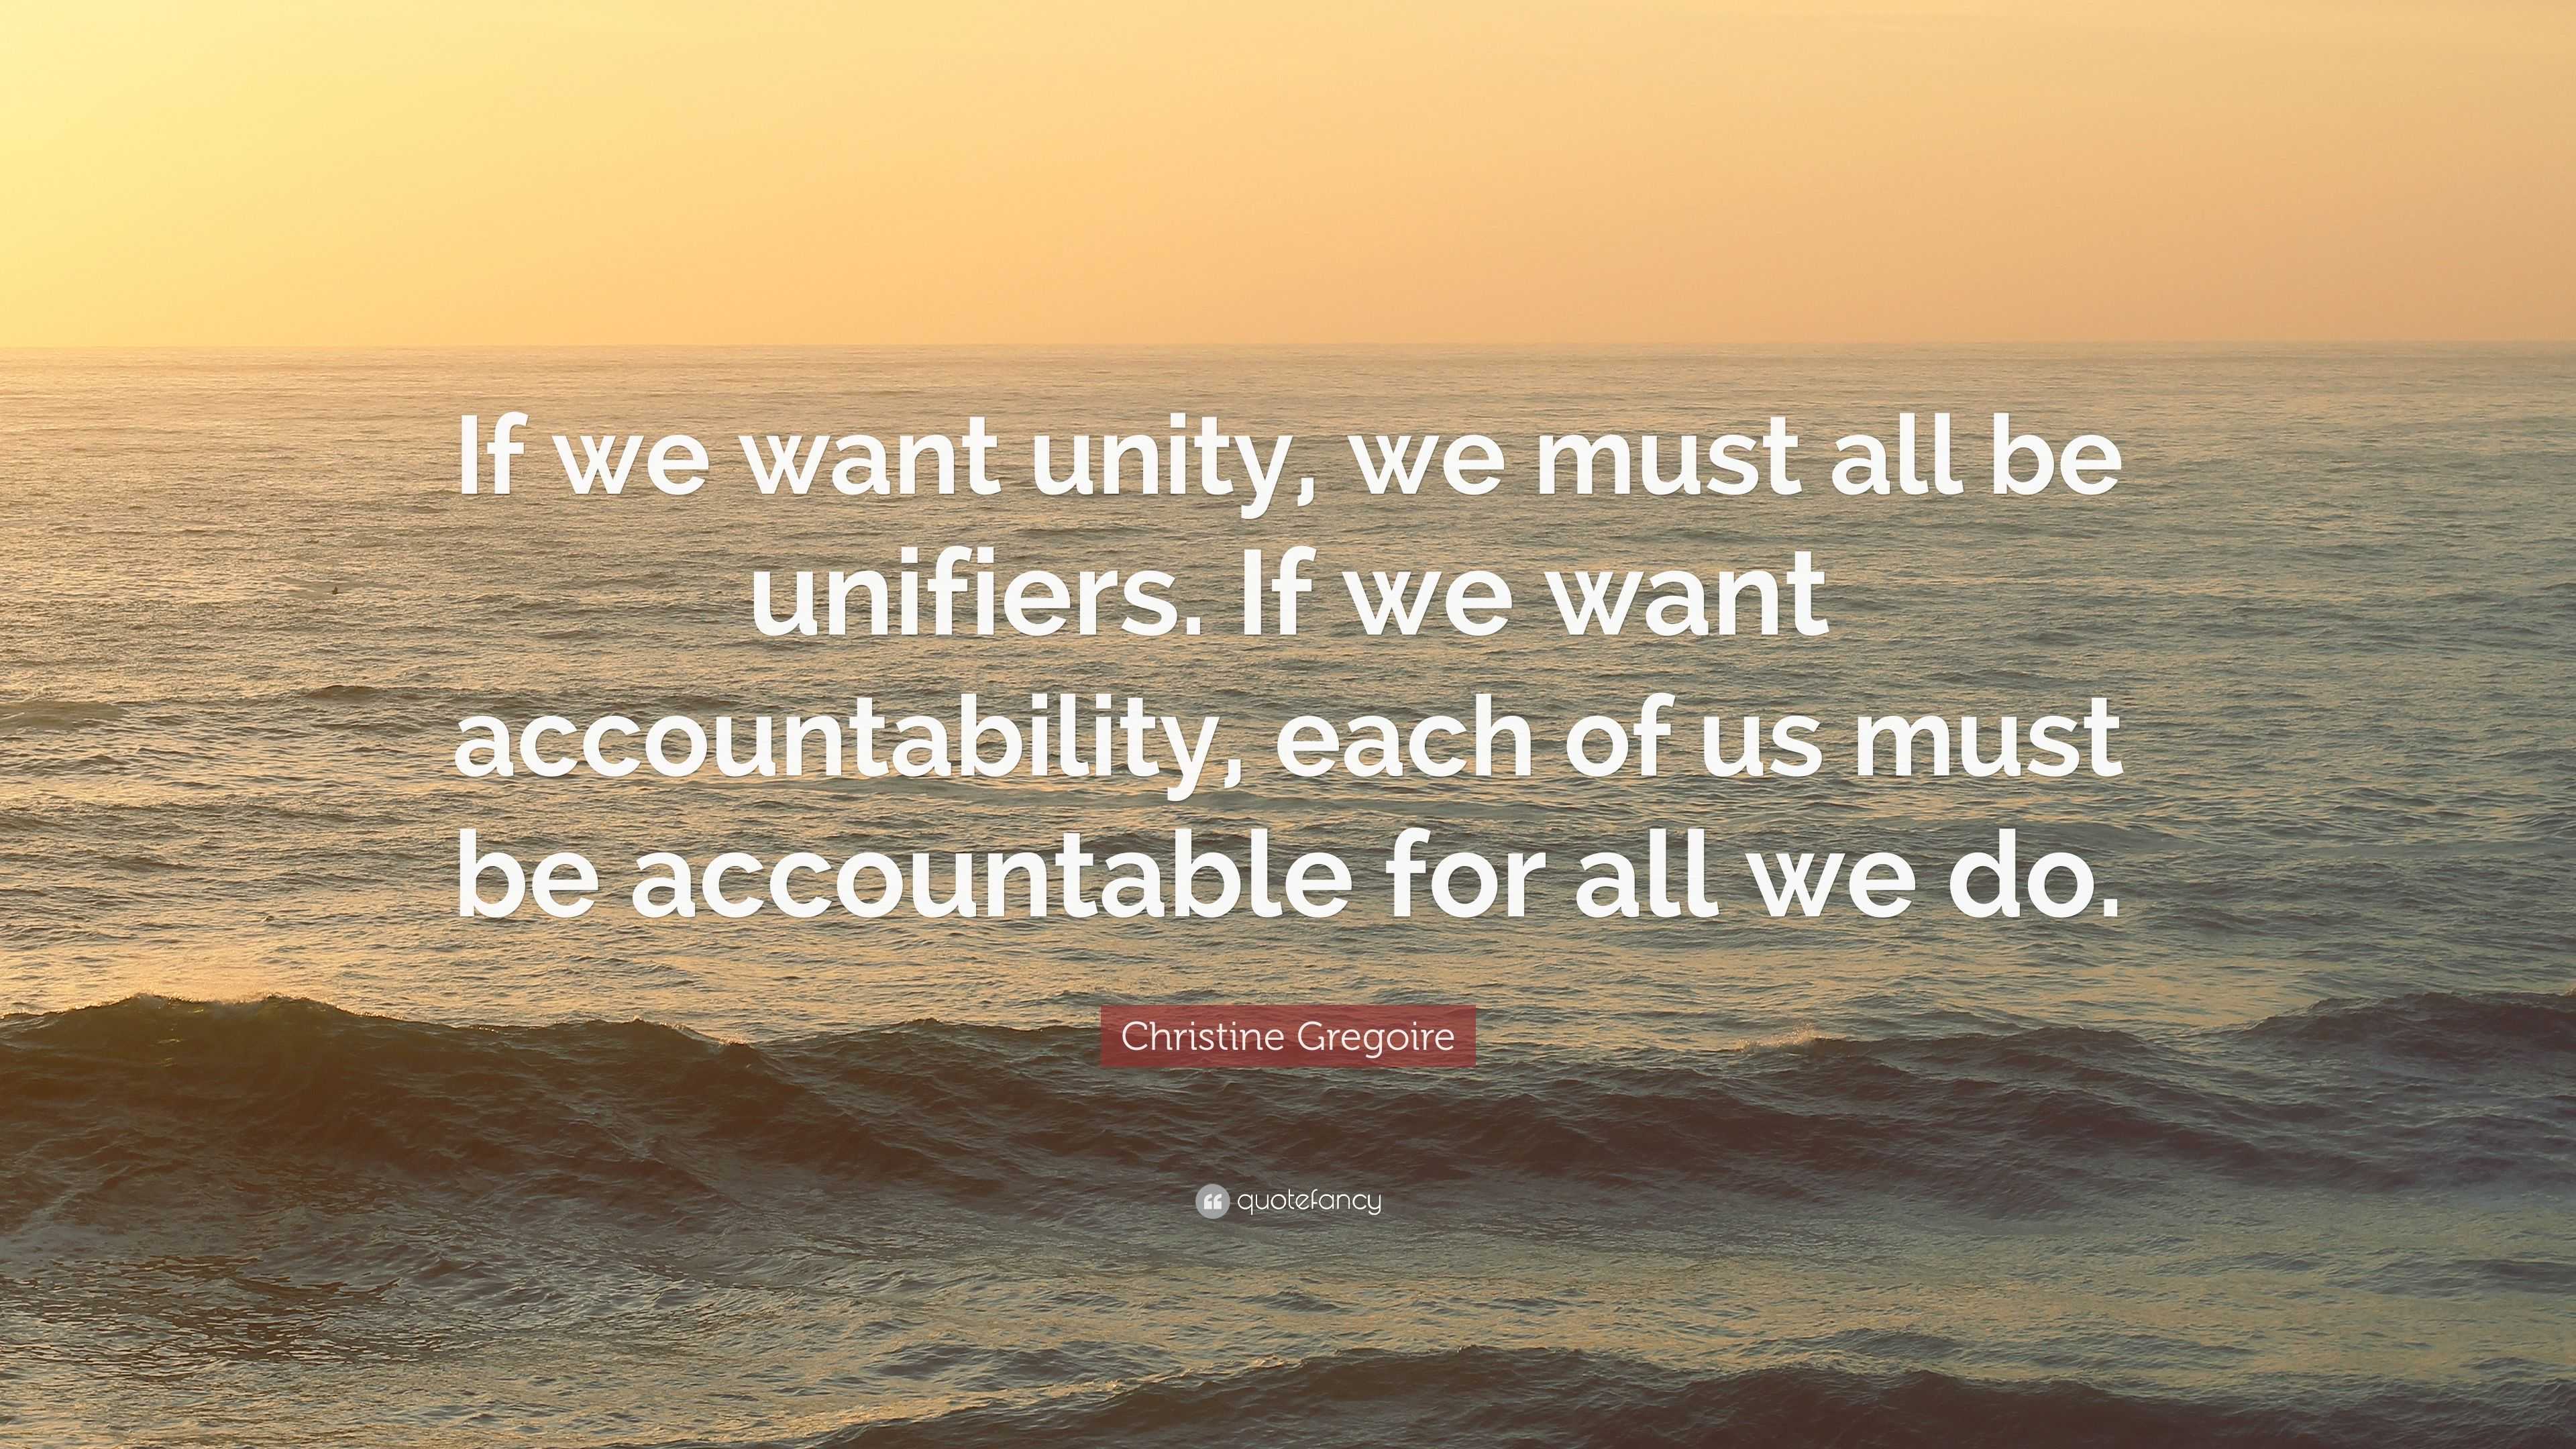 Christine Gregoire Quote: “If we want unity, we must all be unifiers ...